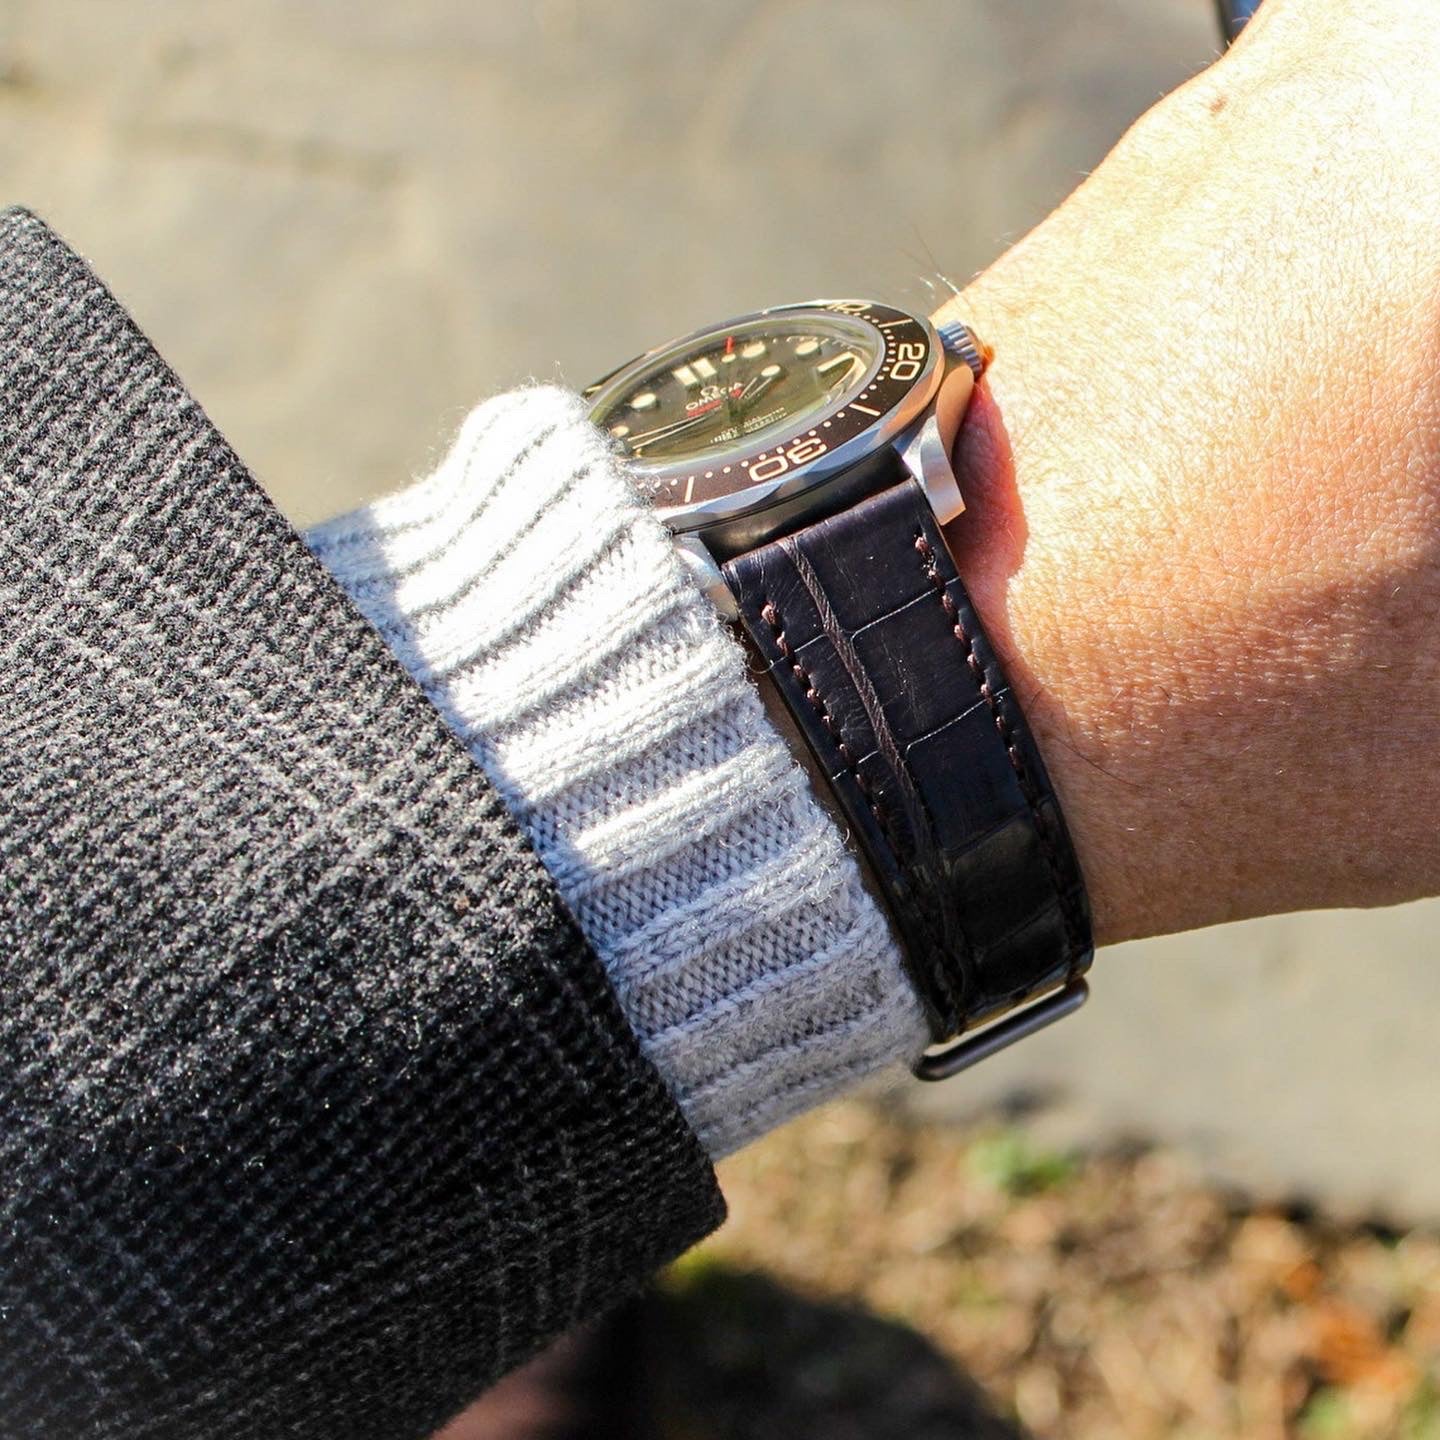 The Parsonage Watch Strap in Brown